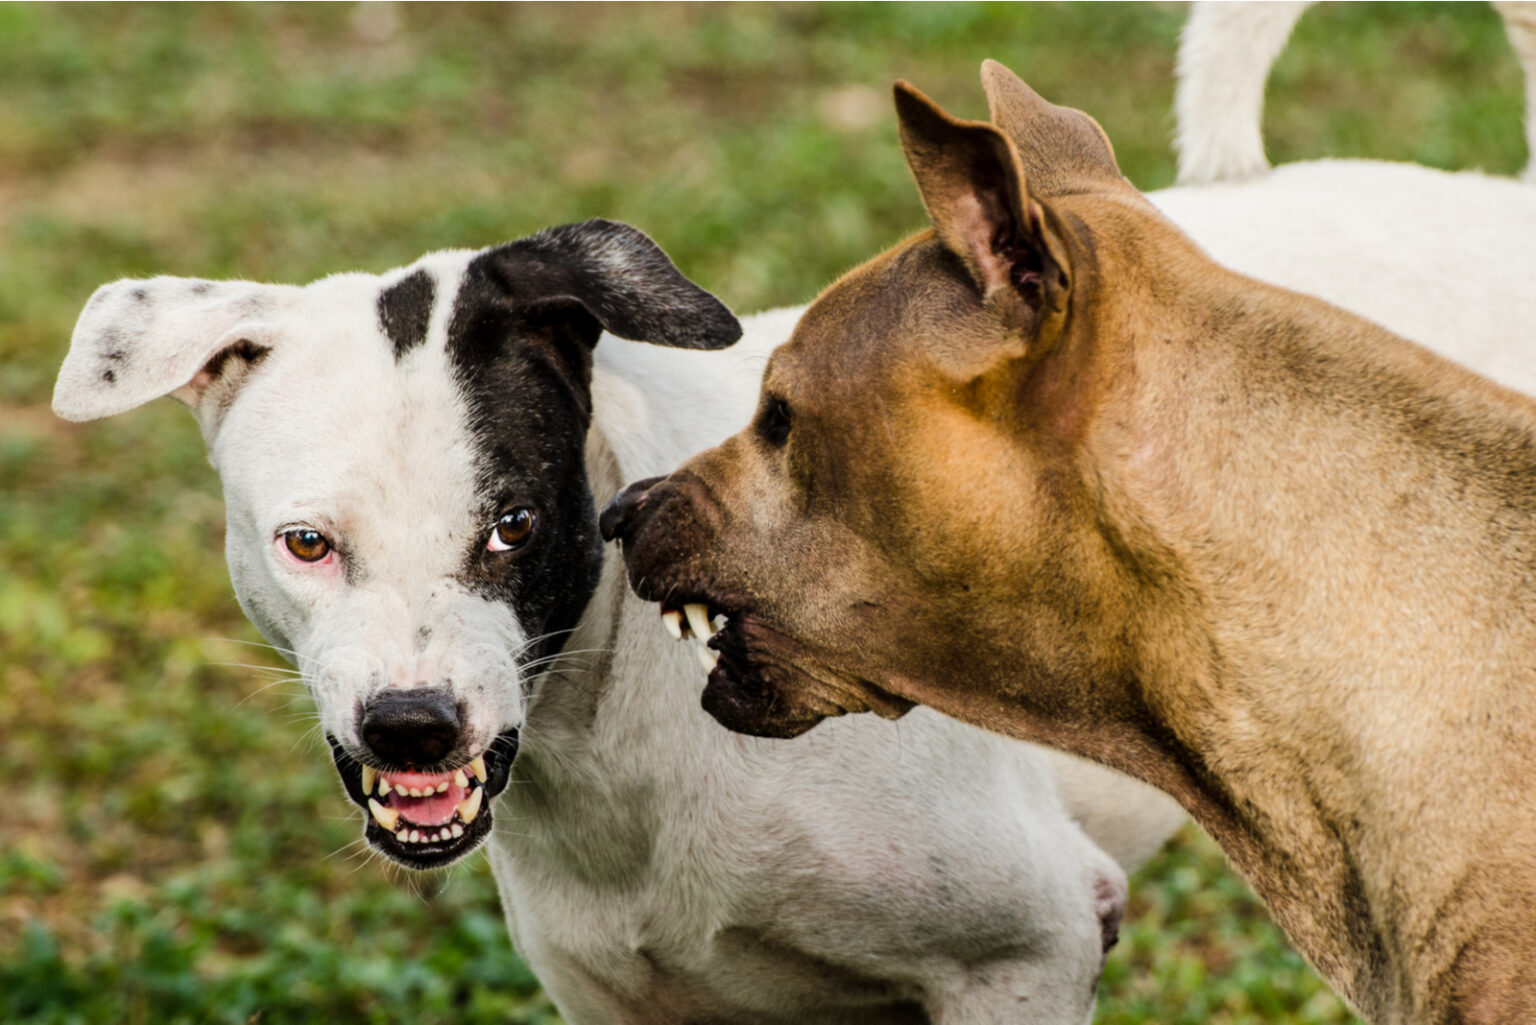 Where To Surrender An Aggressive Dog? 6 Safe Solutions